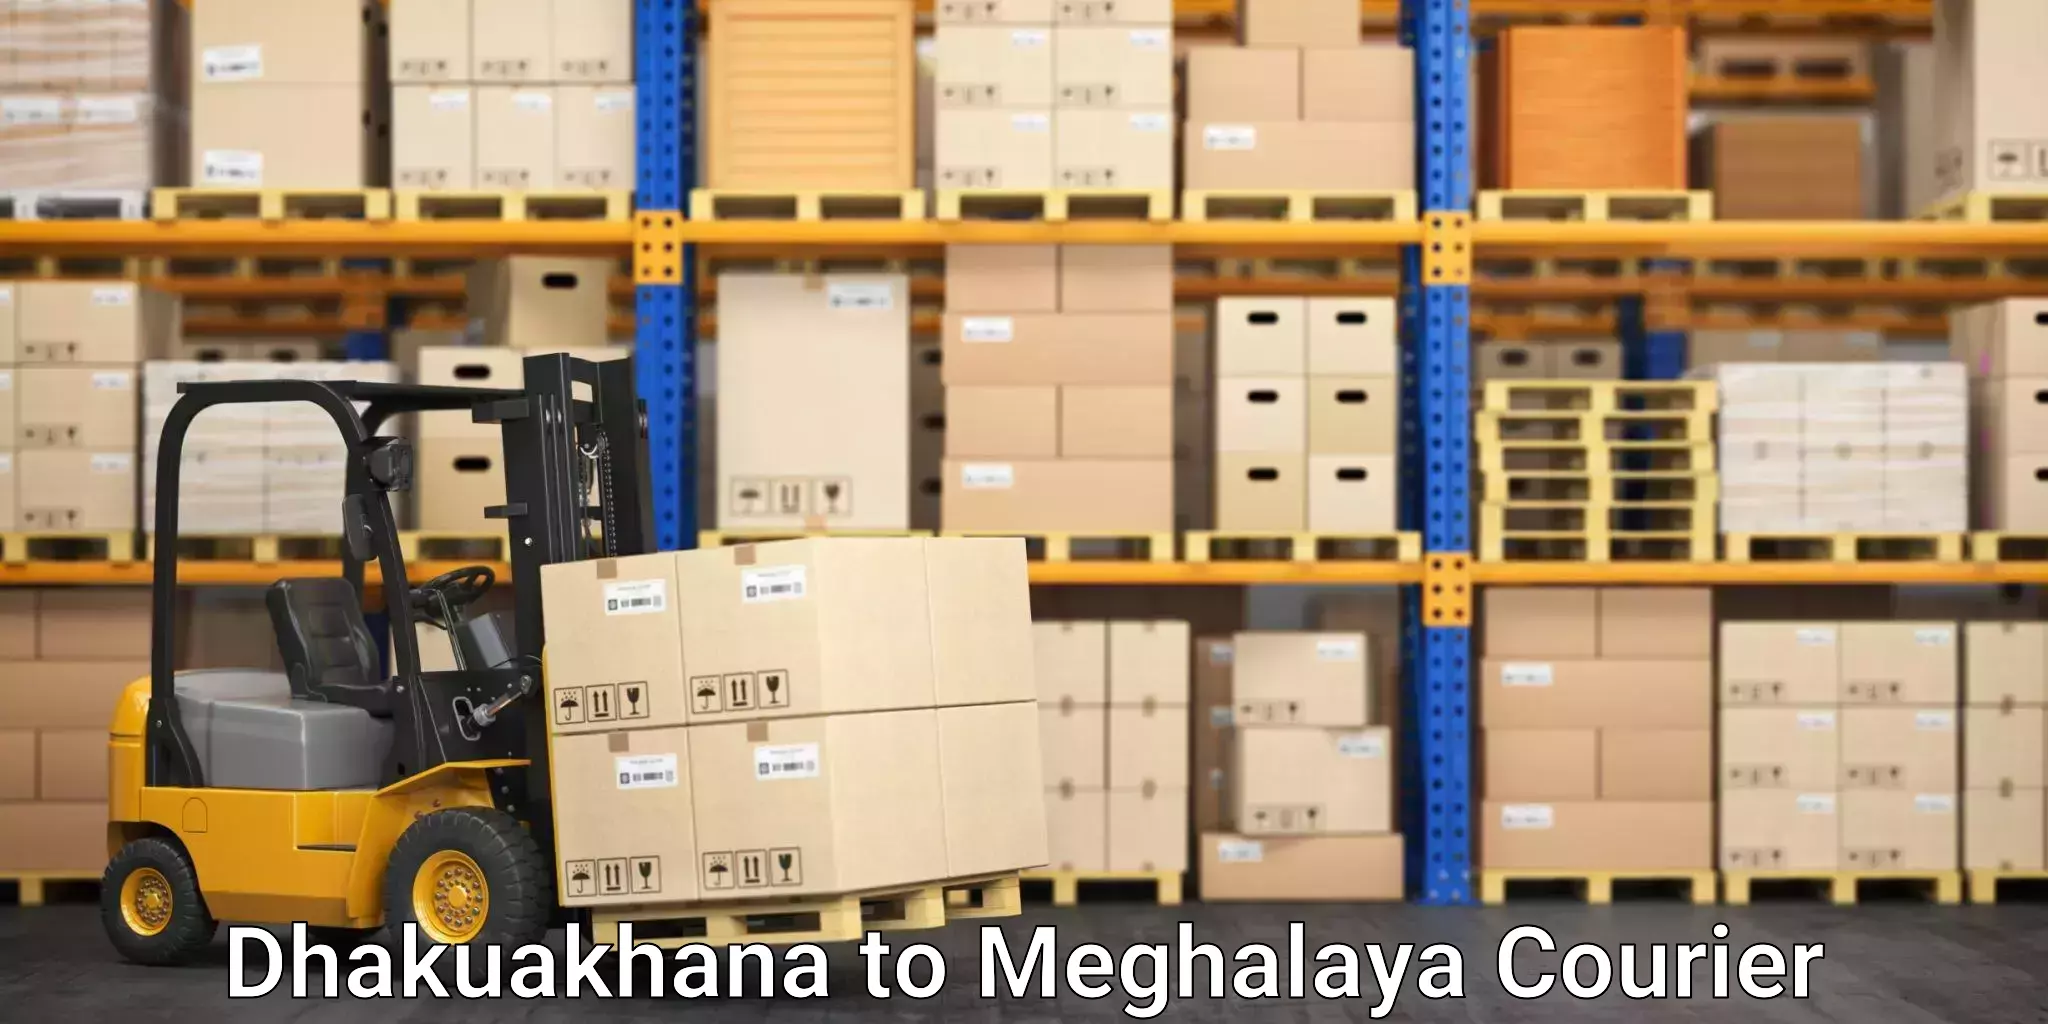 End-to-end delivery in Dhakuakhana to Meghalaya